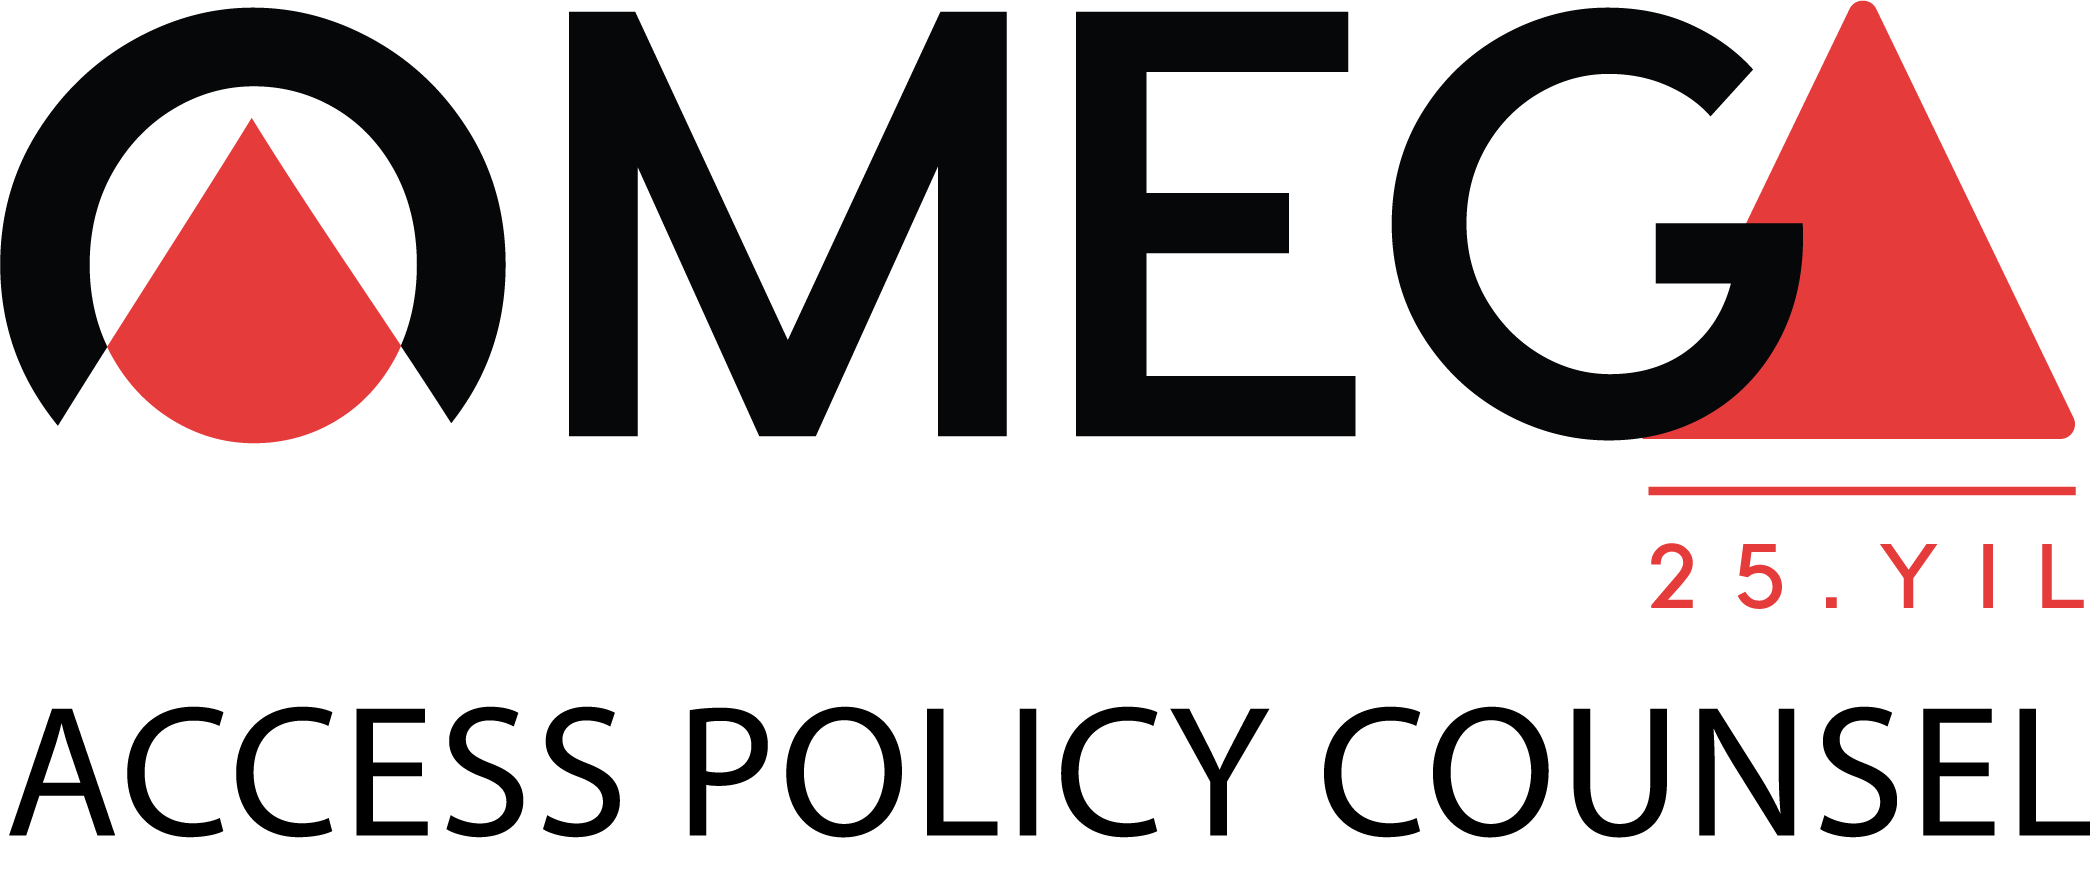 OMEGA CRO – Access Policy Counsel